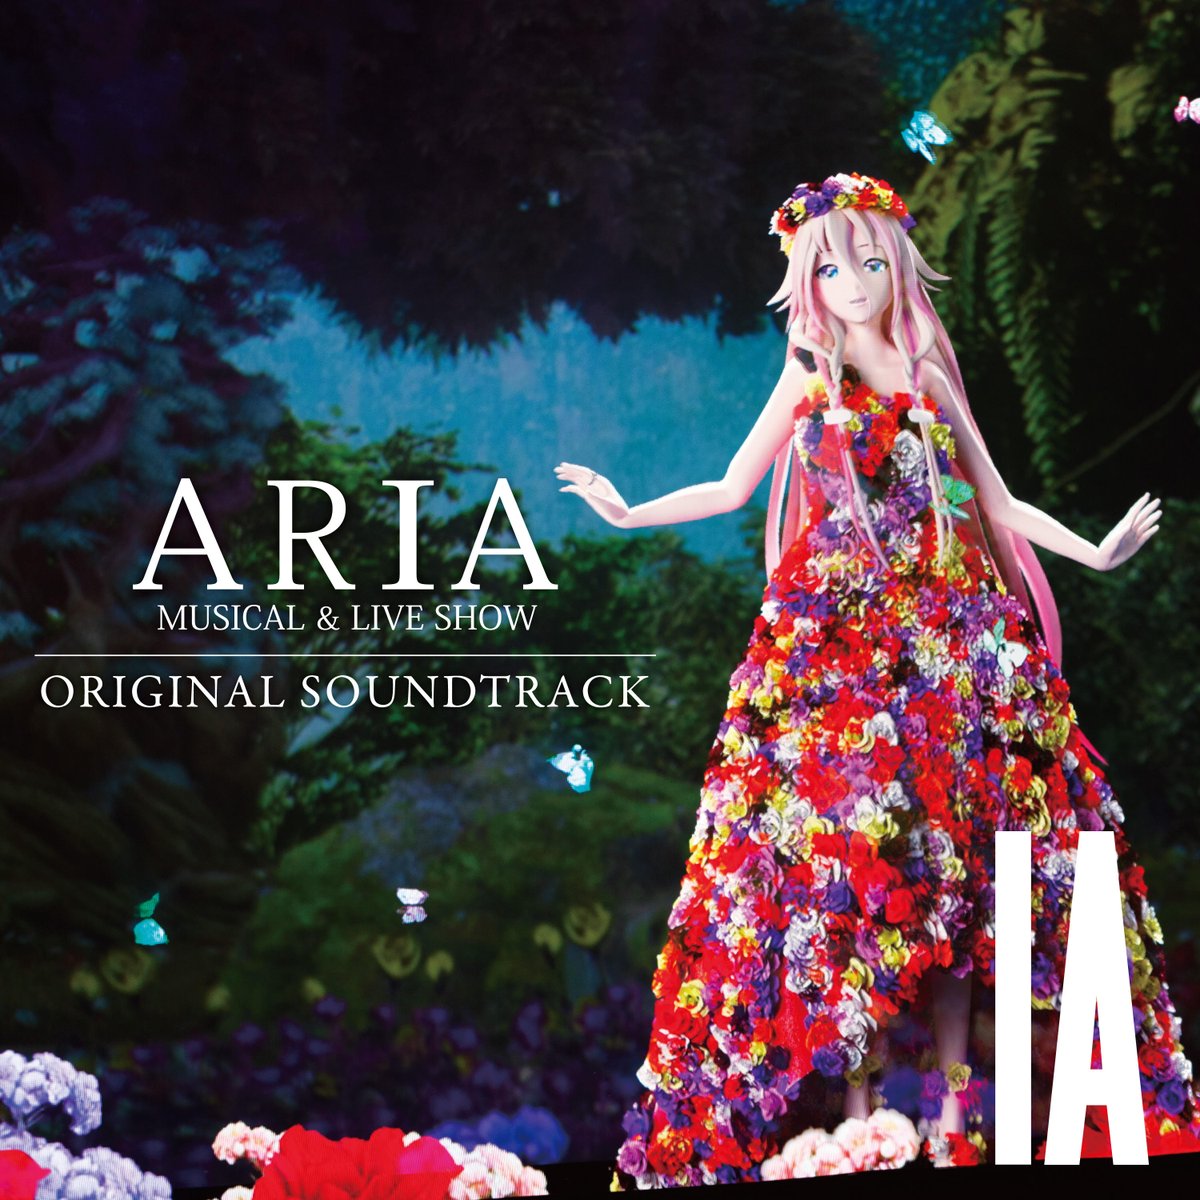 1st Place Ia Aria サントラ発売記念 ローソンプリント 公式ブロマイド販売開始 1st Place0302 Twitter இன ஊடக ட வ ட கள